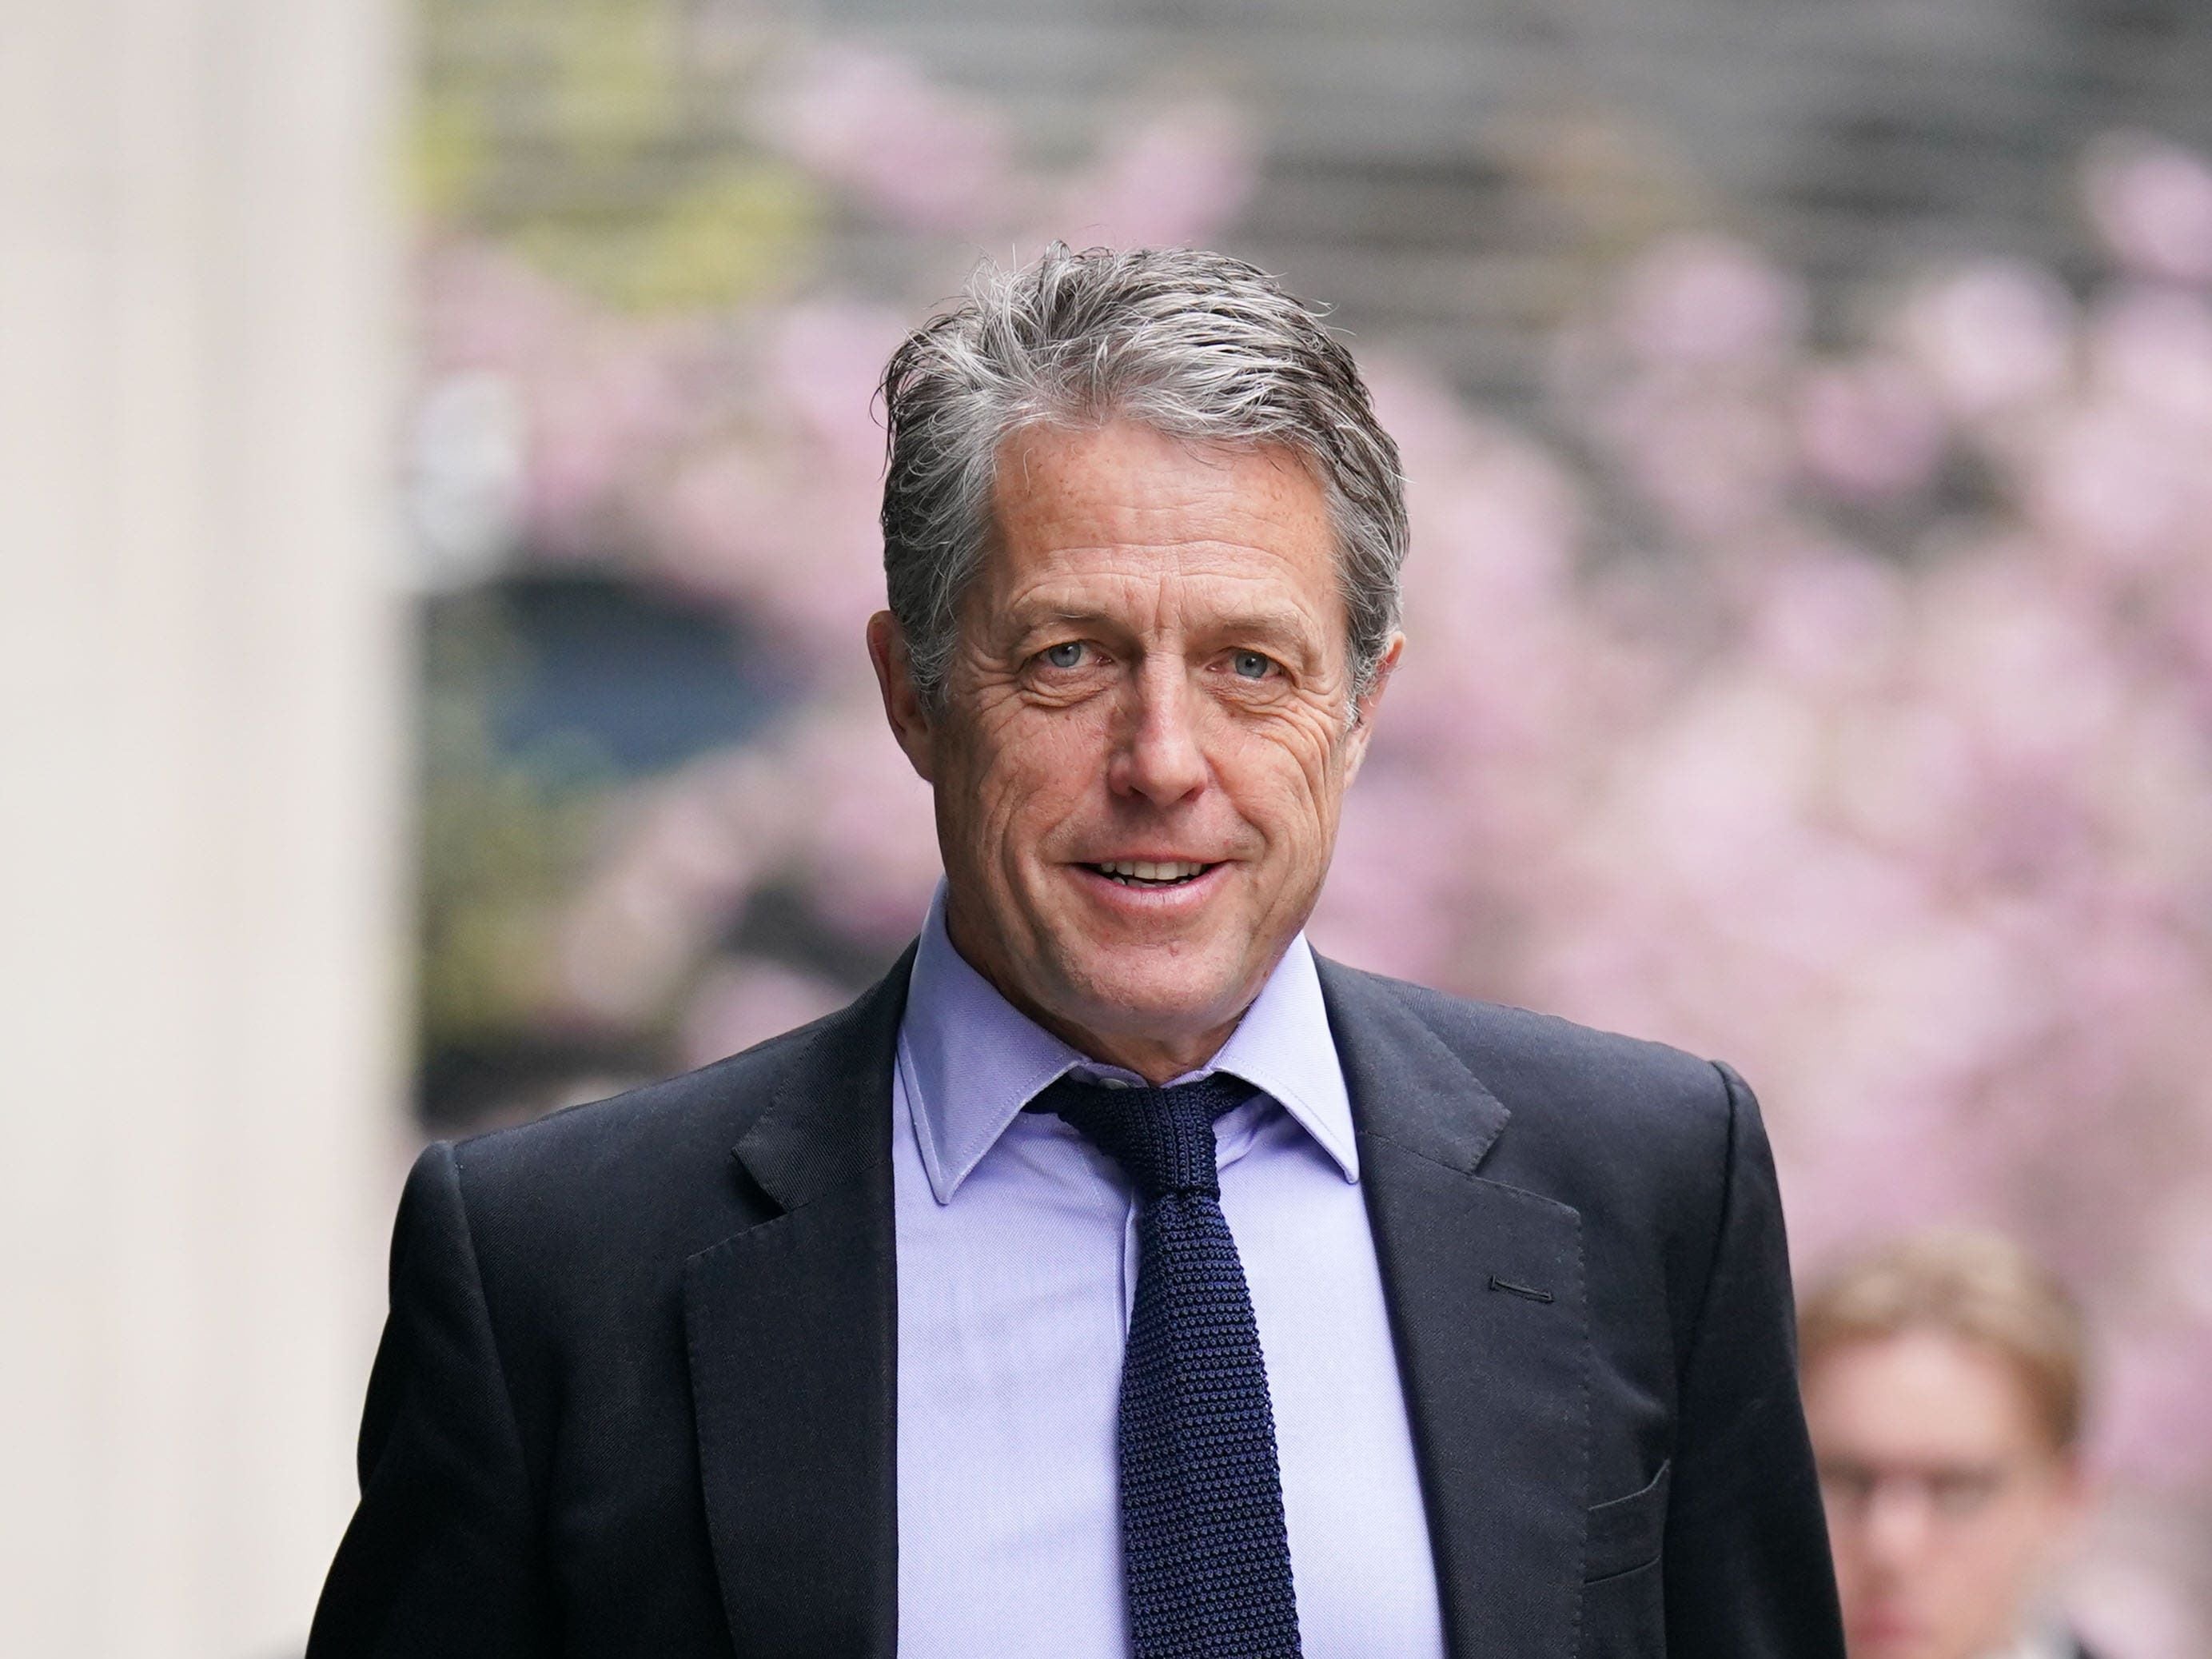 Hugh Grant says he is ‘bitter and determined’ to get ‘justice’ from tabloids